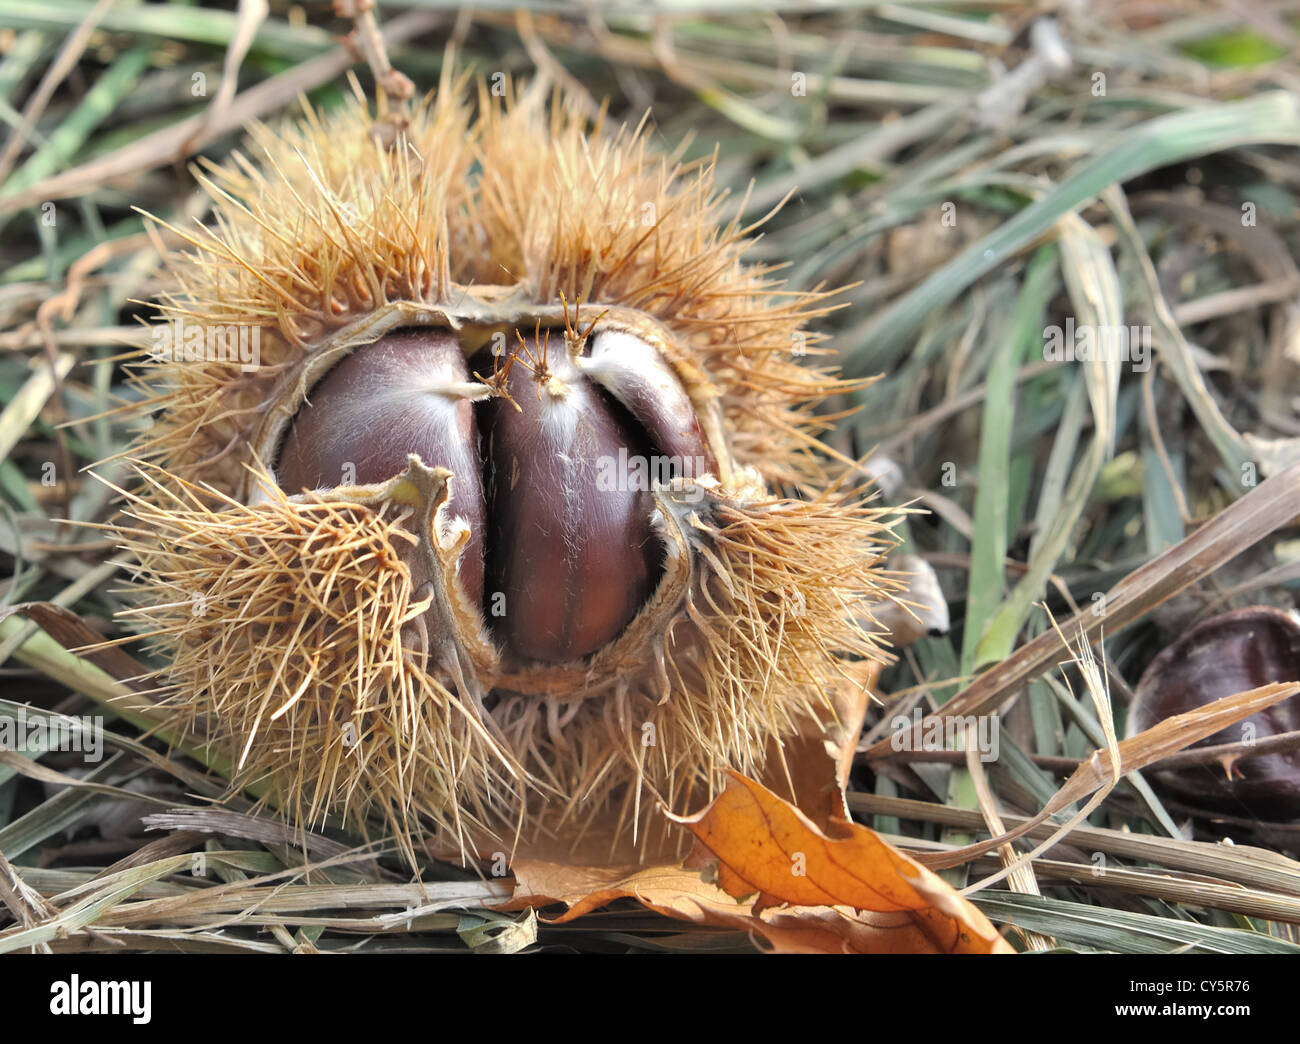 chestnuts in the open husk on the ground Stock Photo